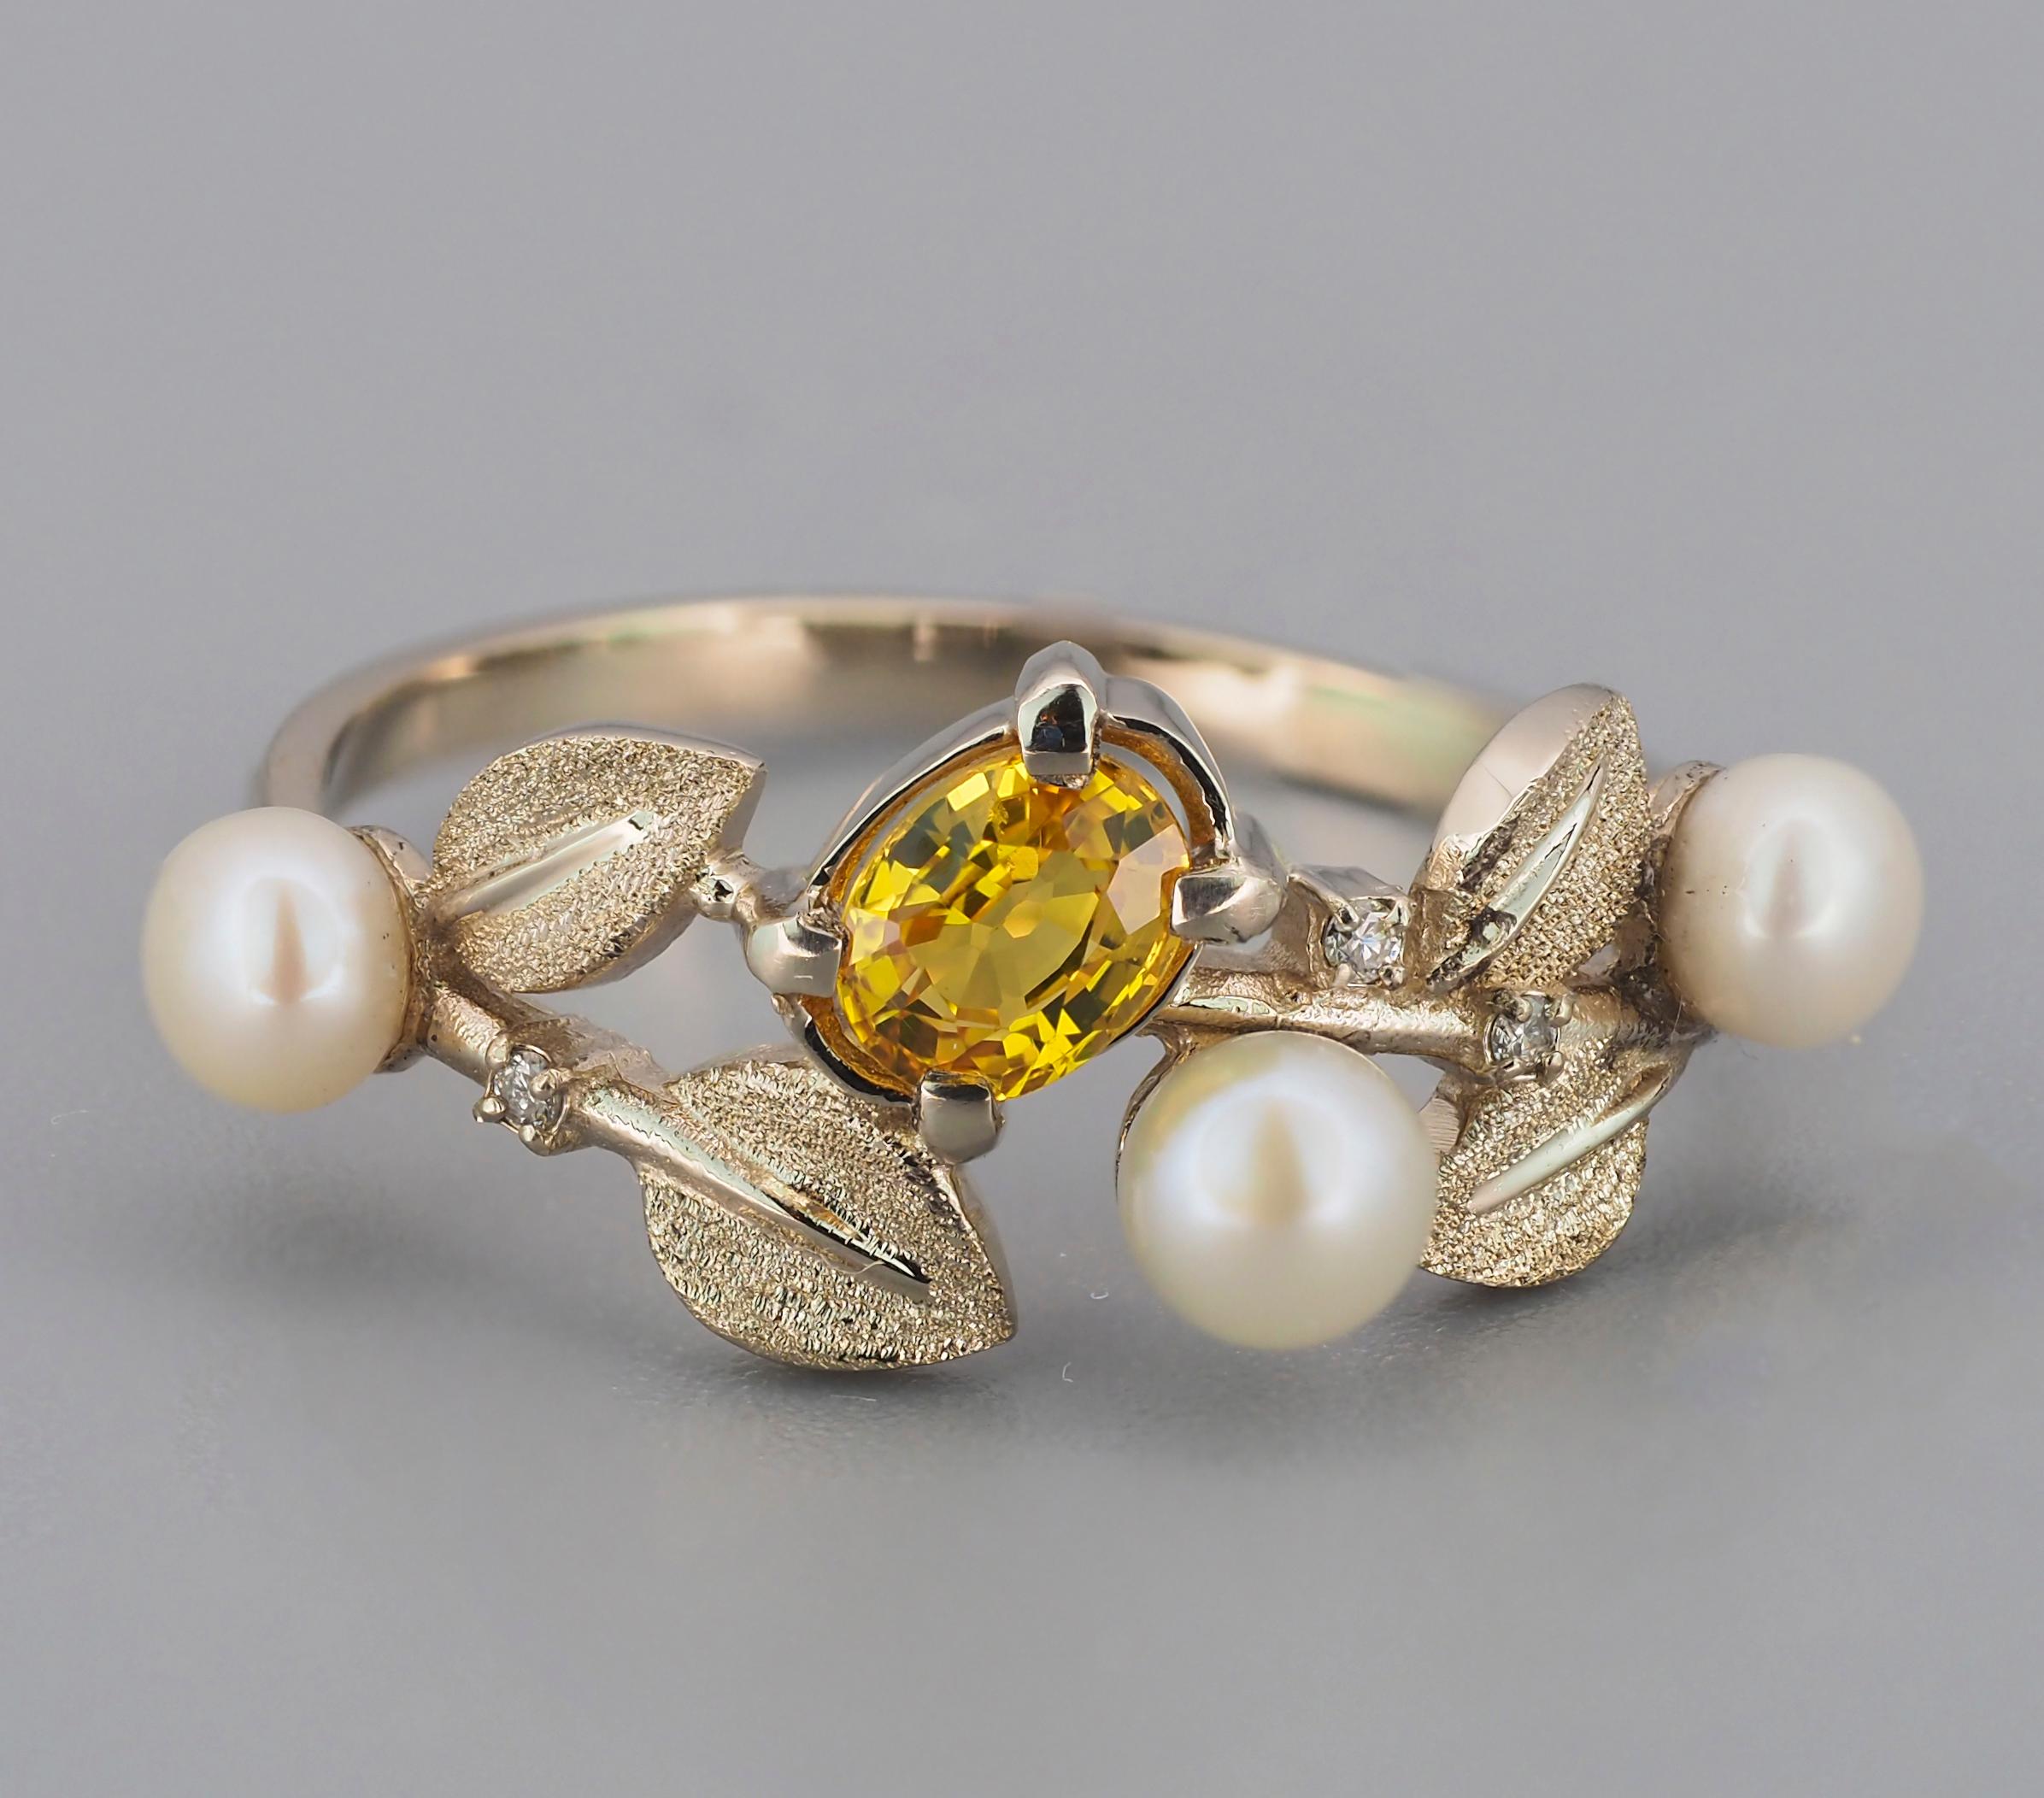 14 kt solid gold Floral ring with natural sapphire, diamonds and pearls. September birthstone.
Weight: 1.8 g.

Central stone: Natural sapphire
Cut: Oval
Weight: approx 0.80 ct.
Color: Light yellow
Clarity: Transparent with inclusions (See in